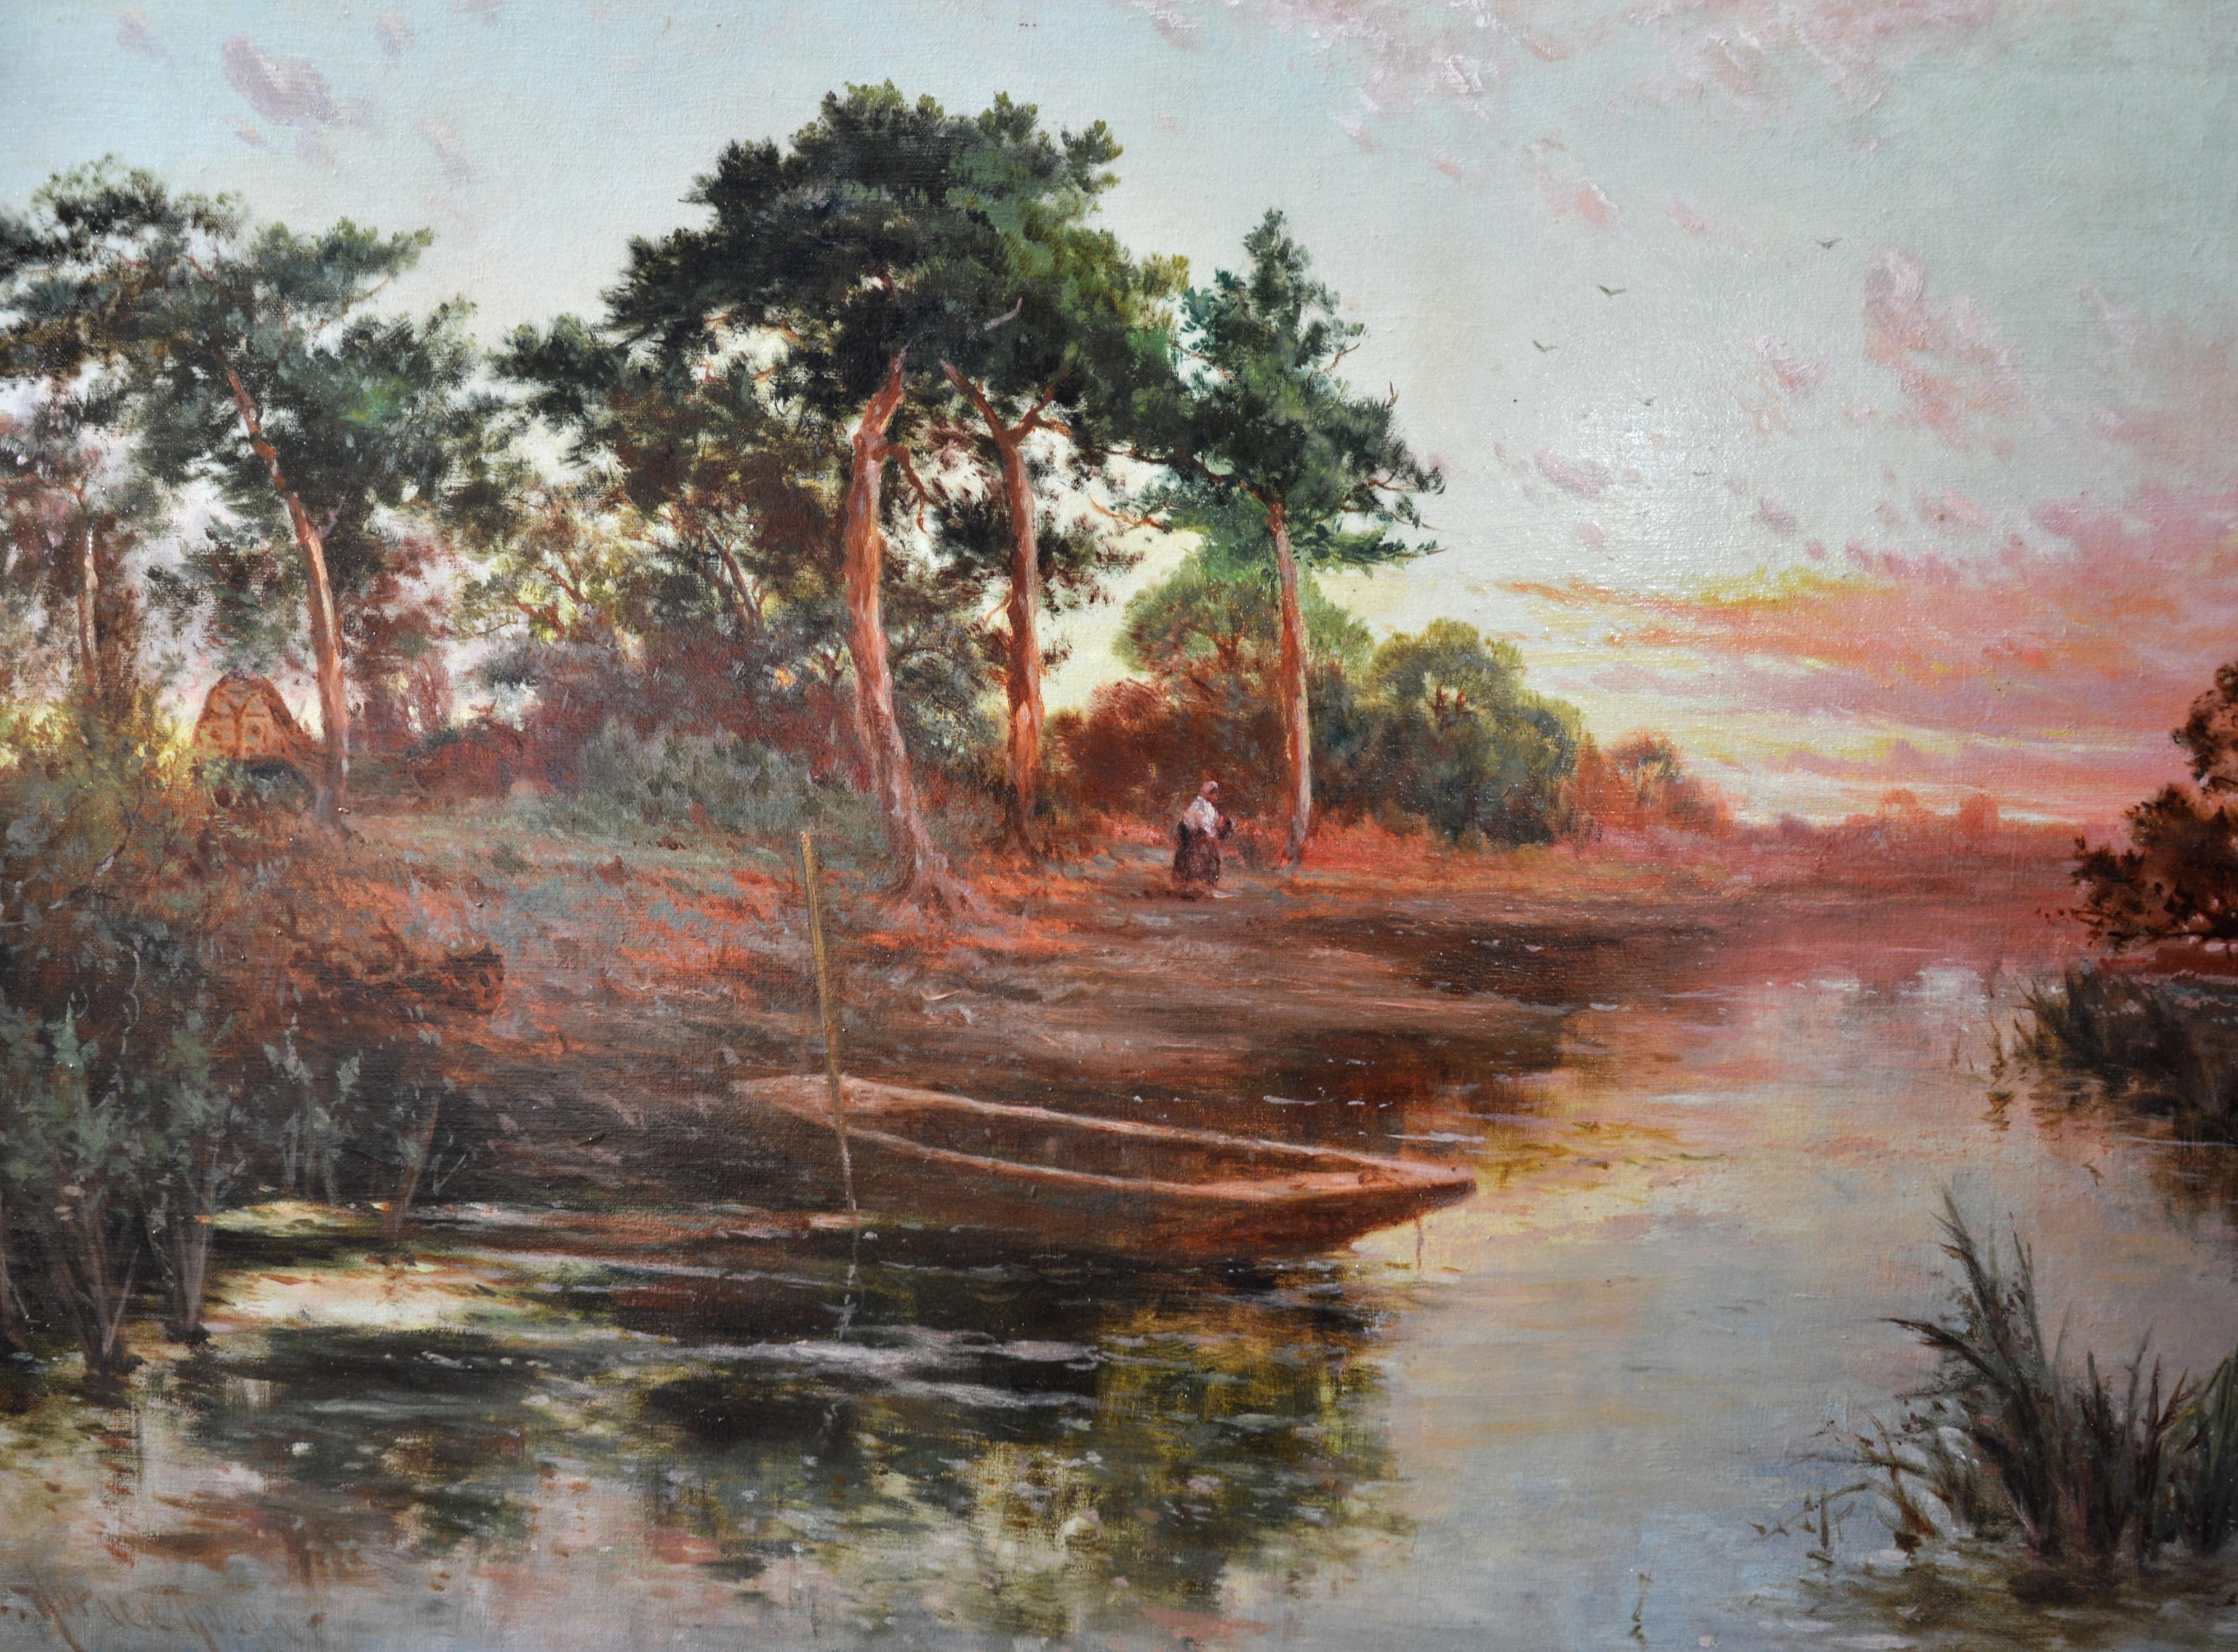 ‘Near Sonning on Thames’ by John Horace Hooper RBA (1853-1906). 

A large 19th century oil on canvas depicting a single figure on the shoreline of the River Thames at sunset. The painting is signed by the artist and hangs in a superb quality newly